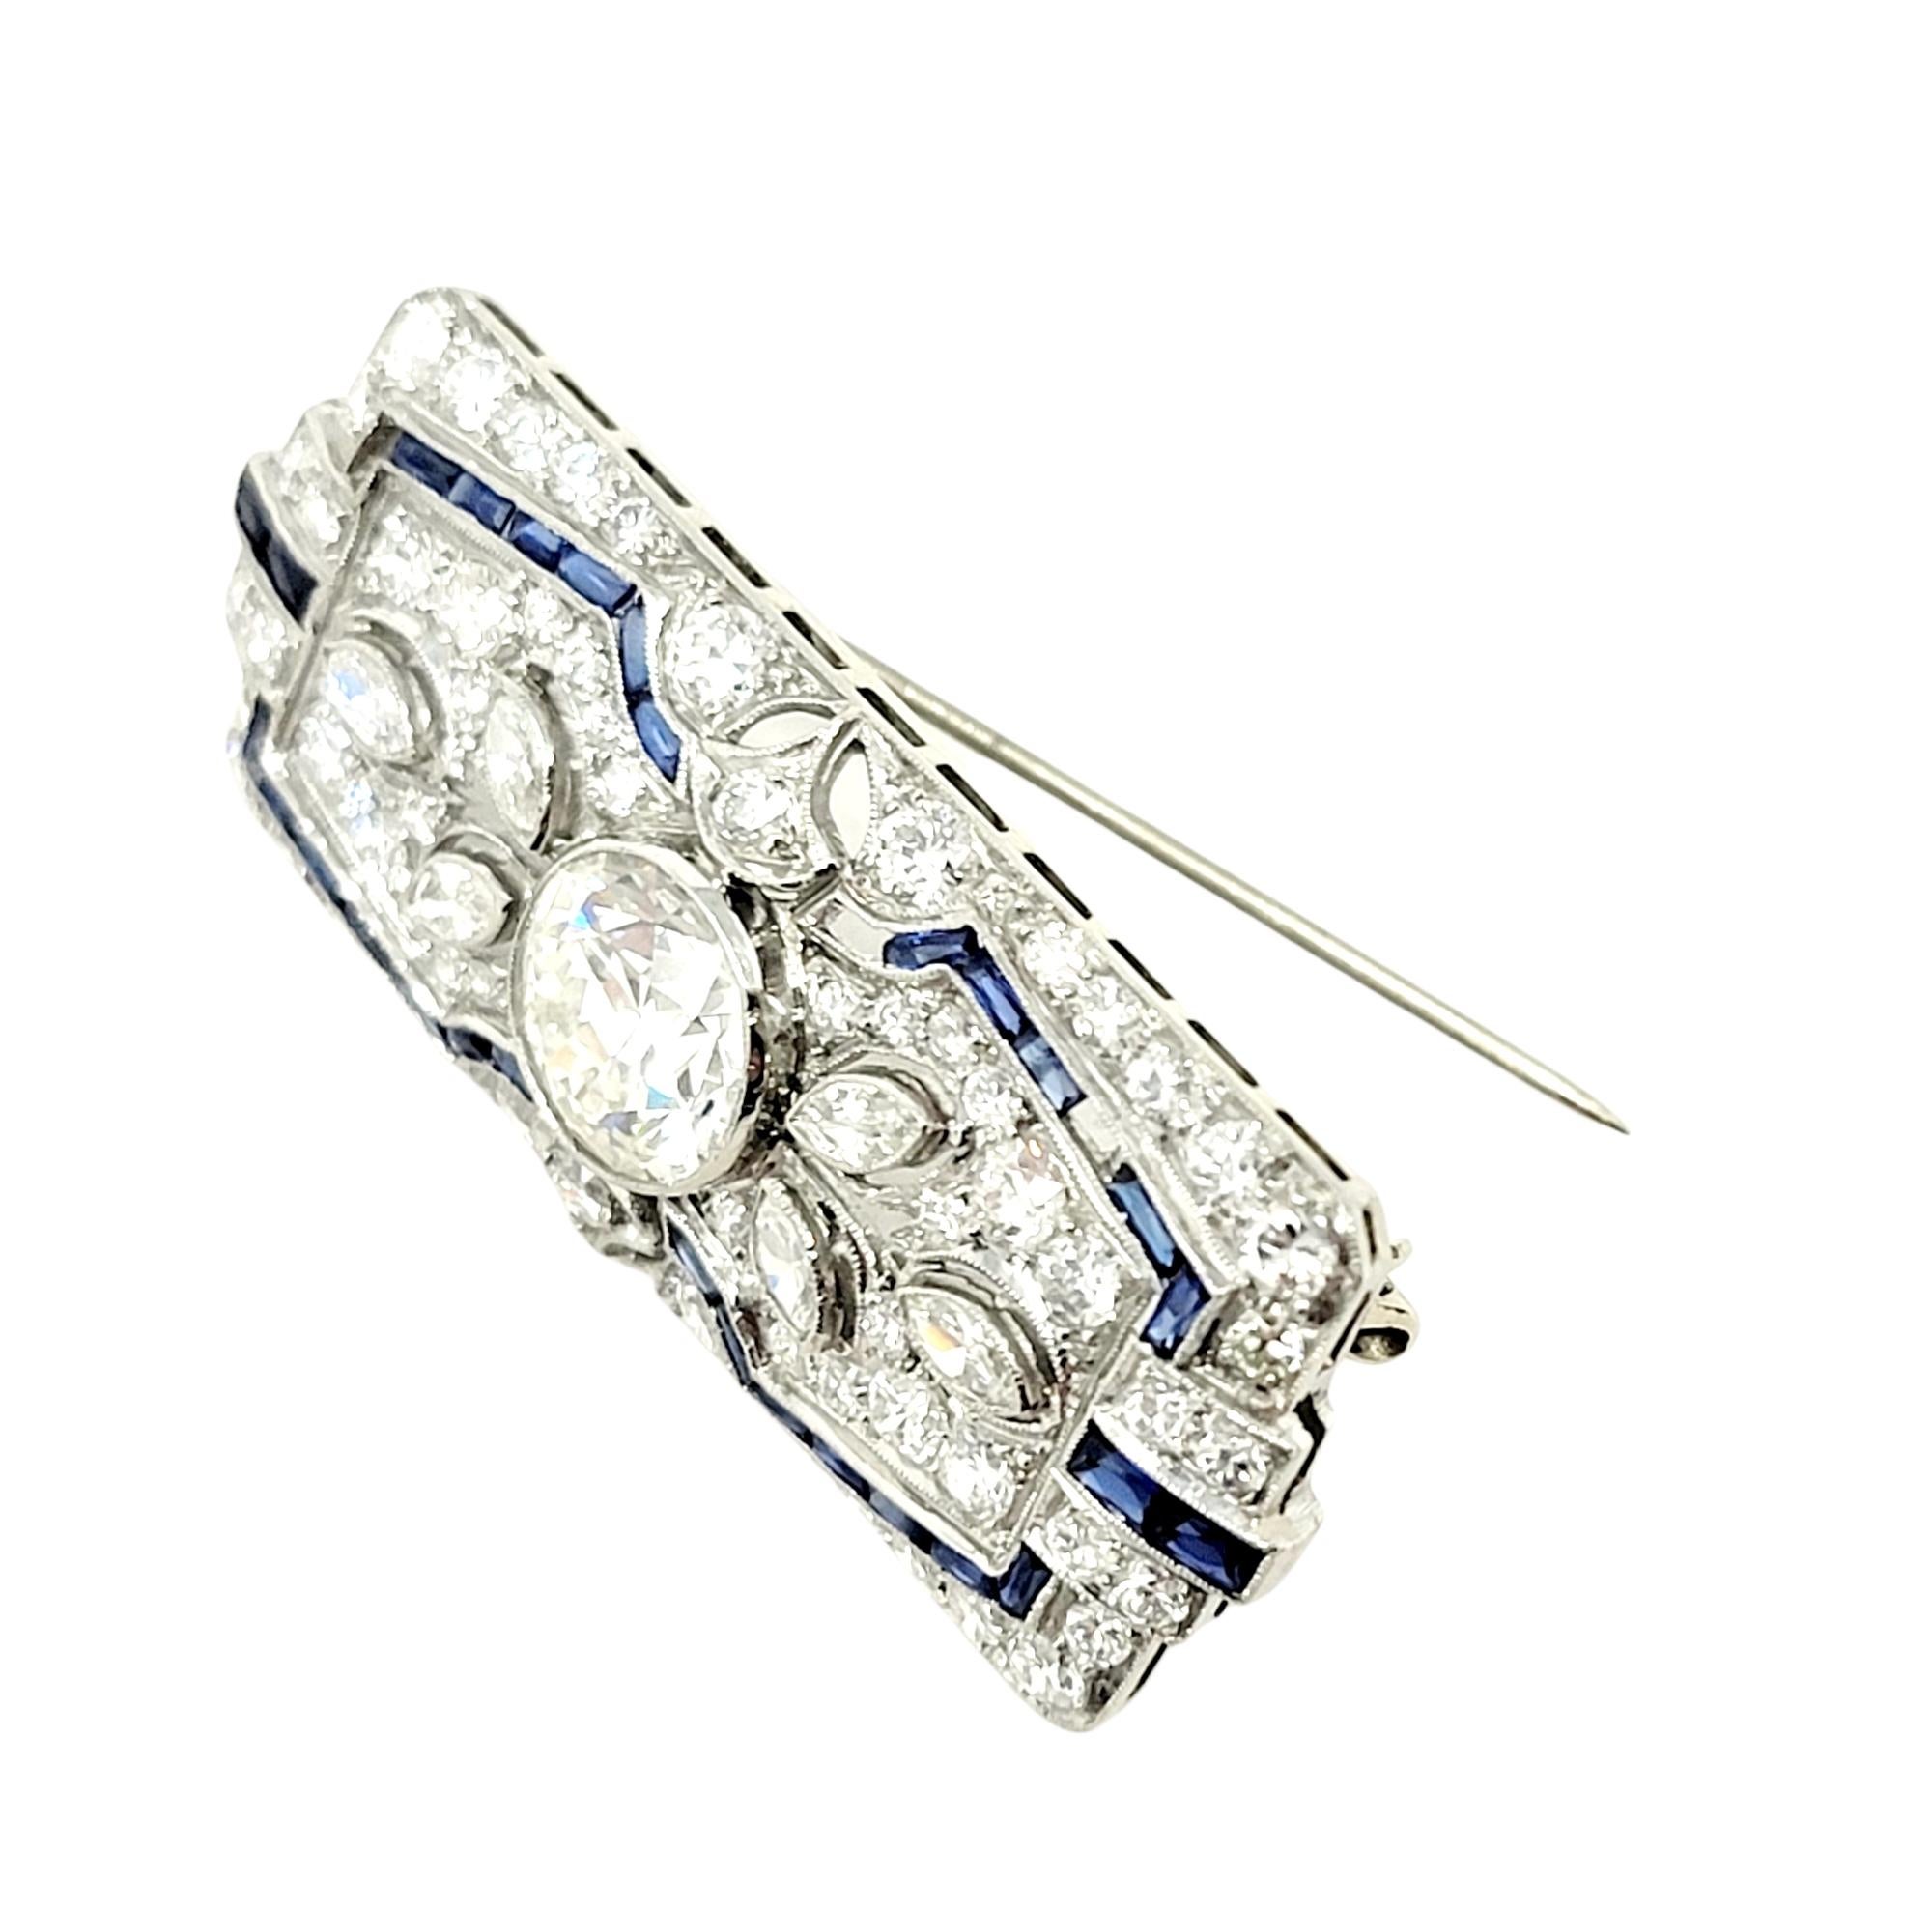 Vintage Ornate Diamond and Sapphire Rectangle Brooch/Pendant Bar in Platinum For Sale 2